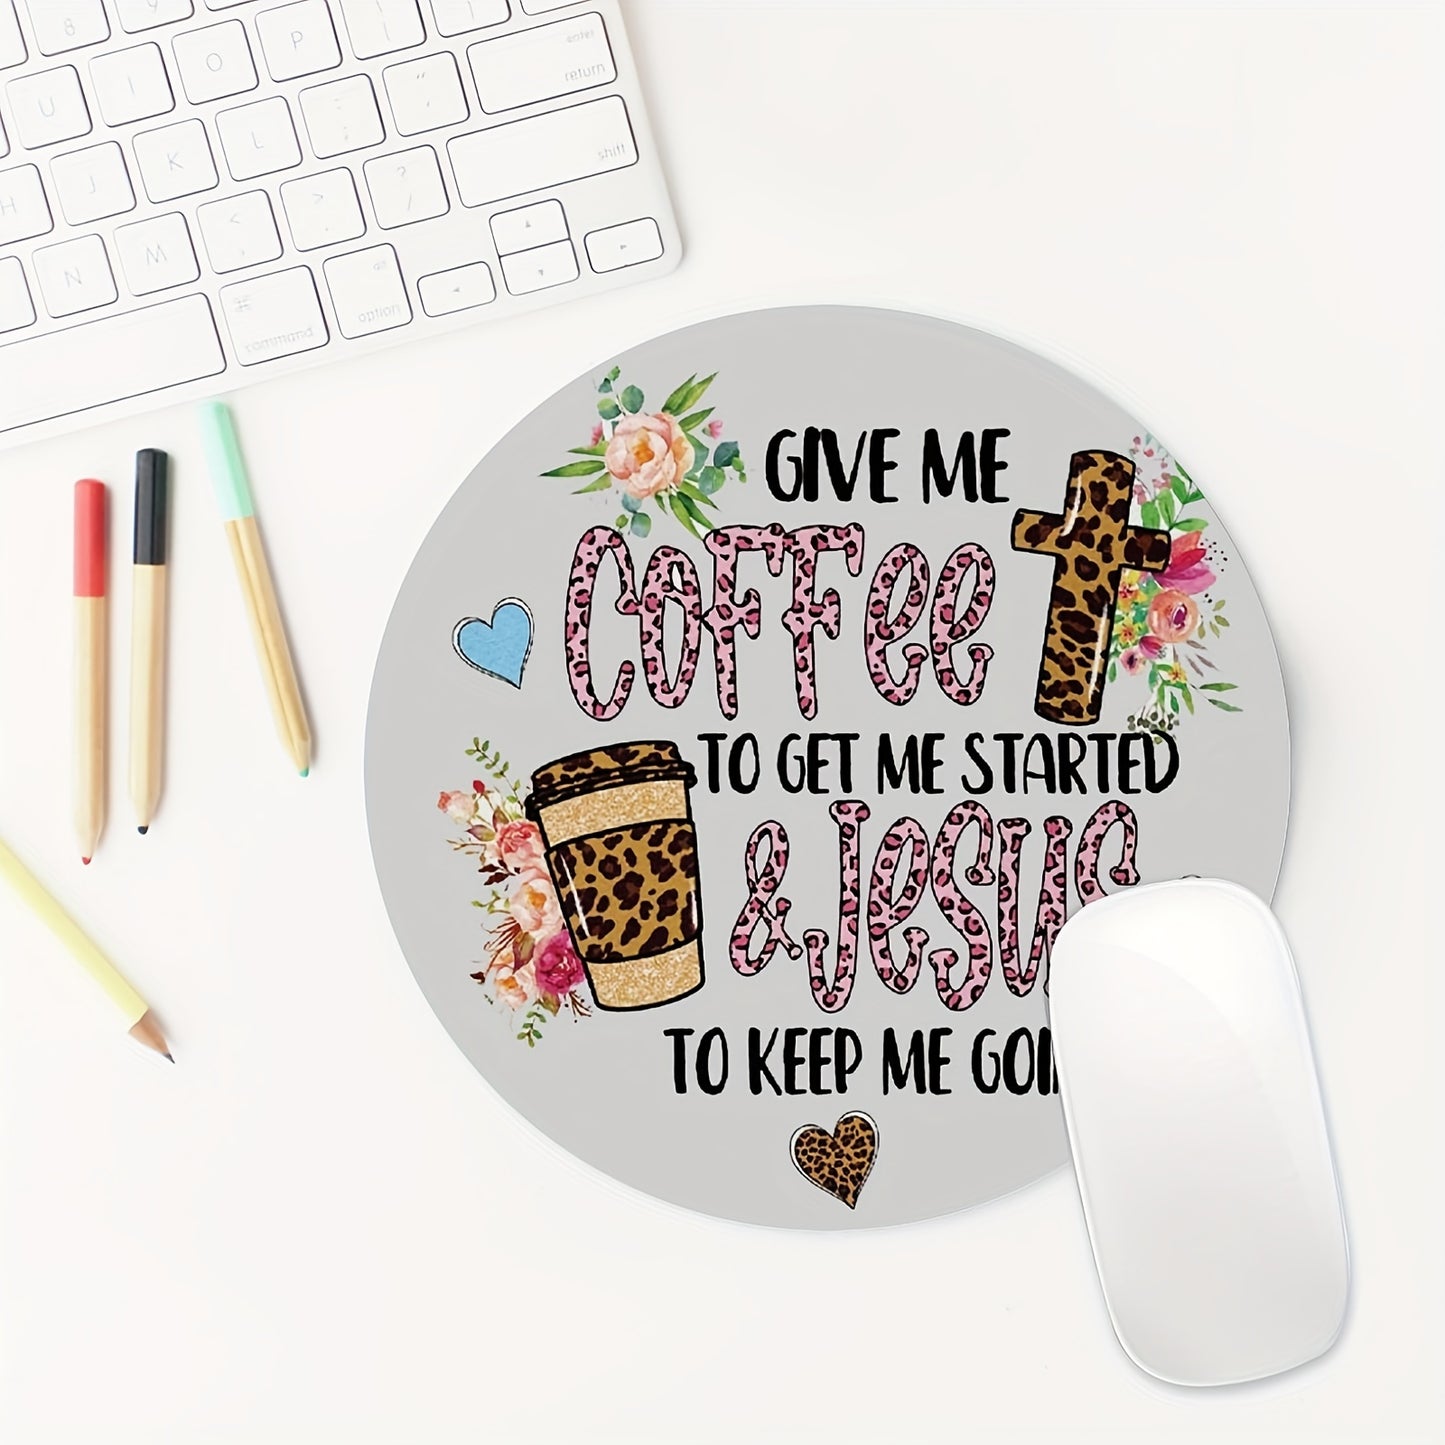 Give Me Coffee To Get Me Started & Jesus To Keep Me Going Christian Computer Mouse Pad claimedbygoddesigns